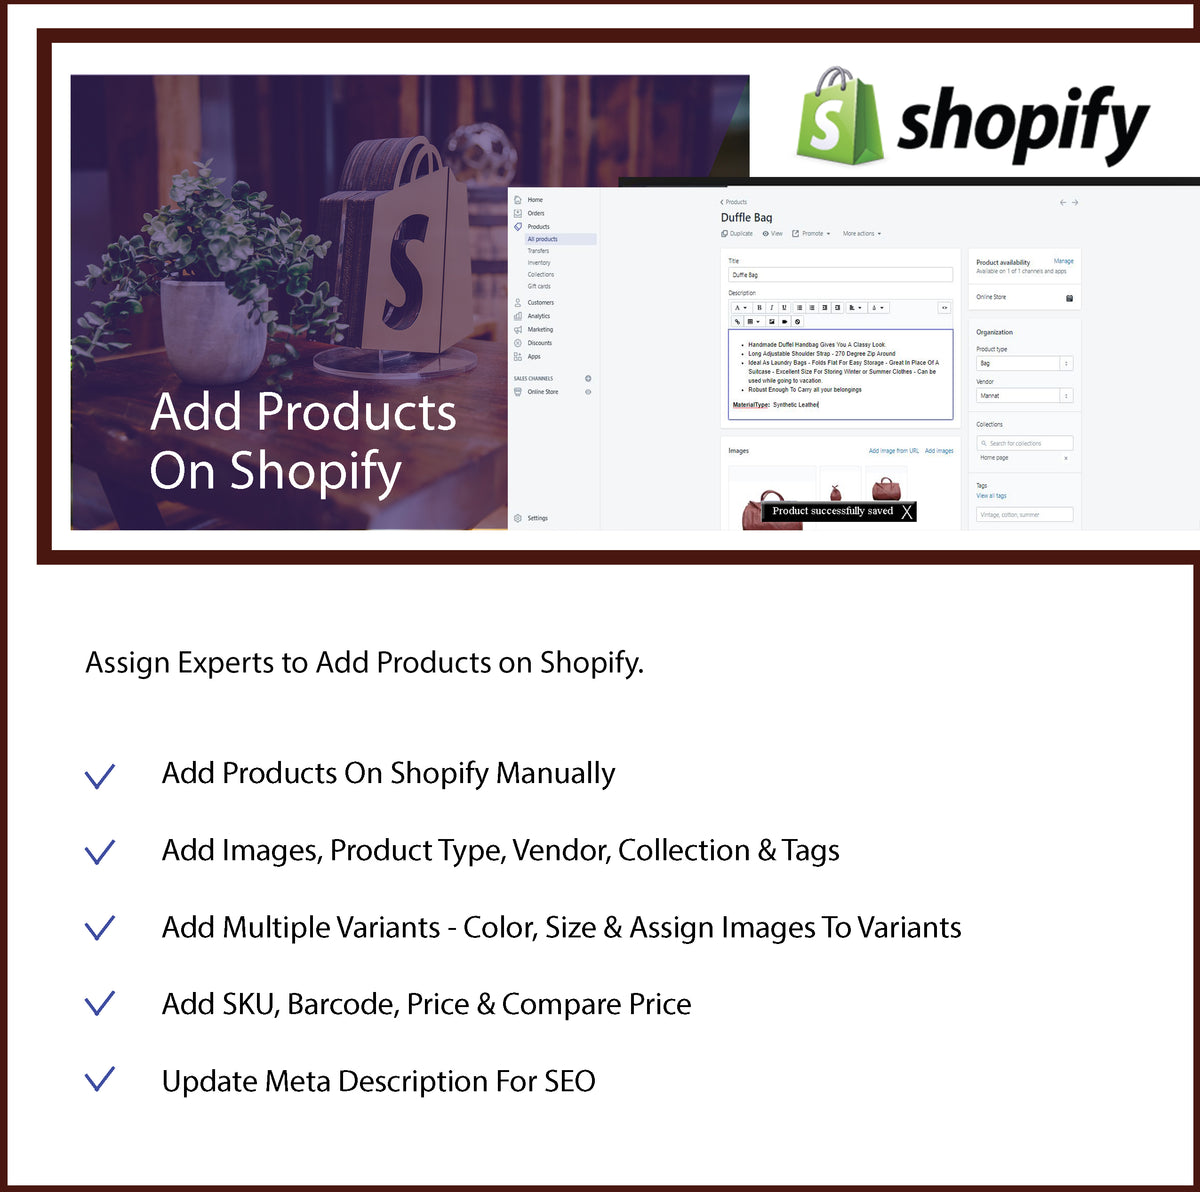 Add Products On Shopify